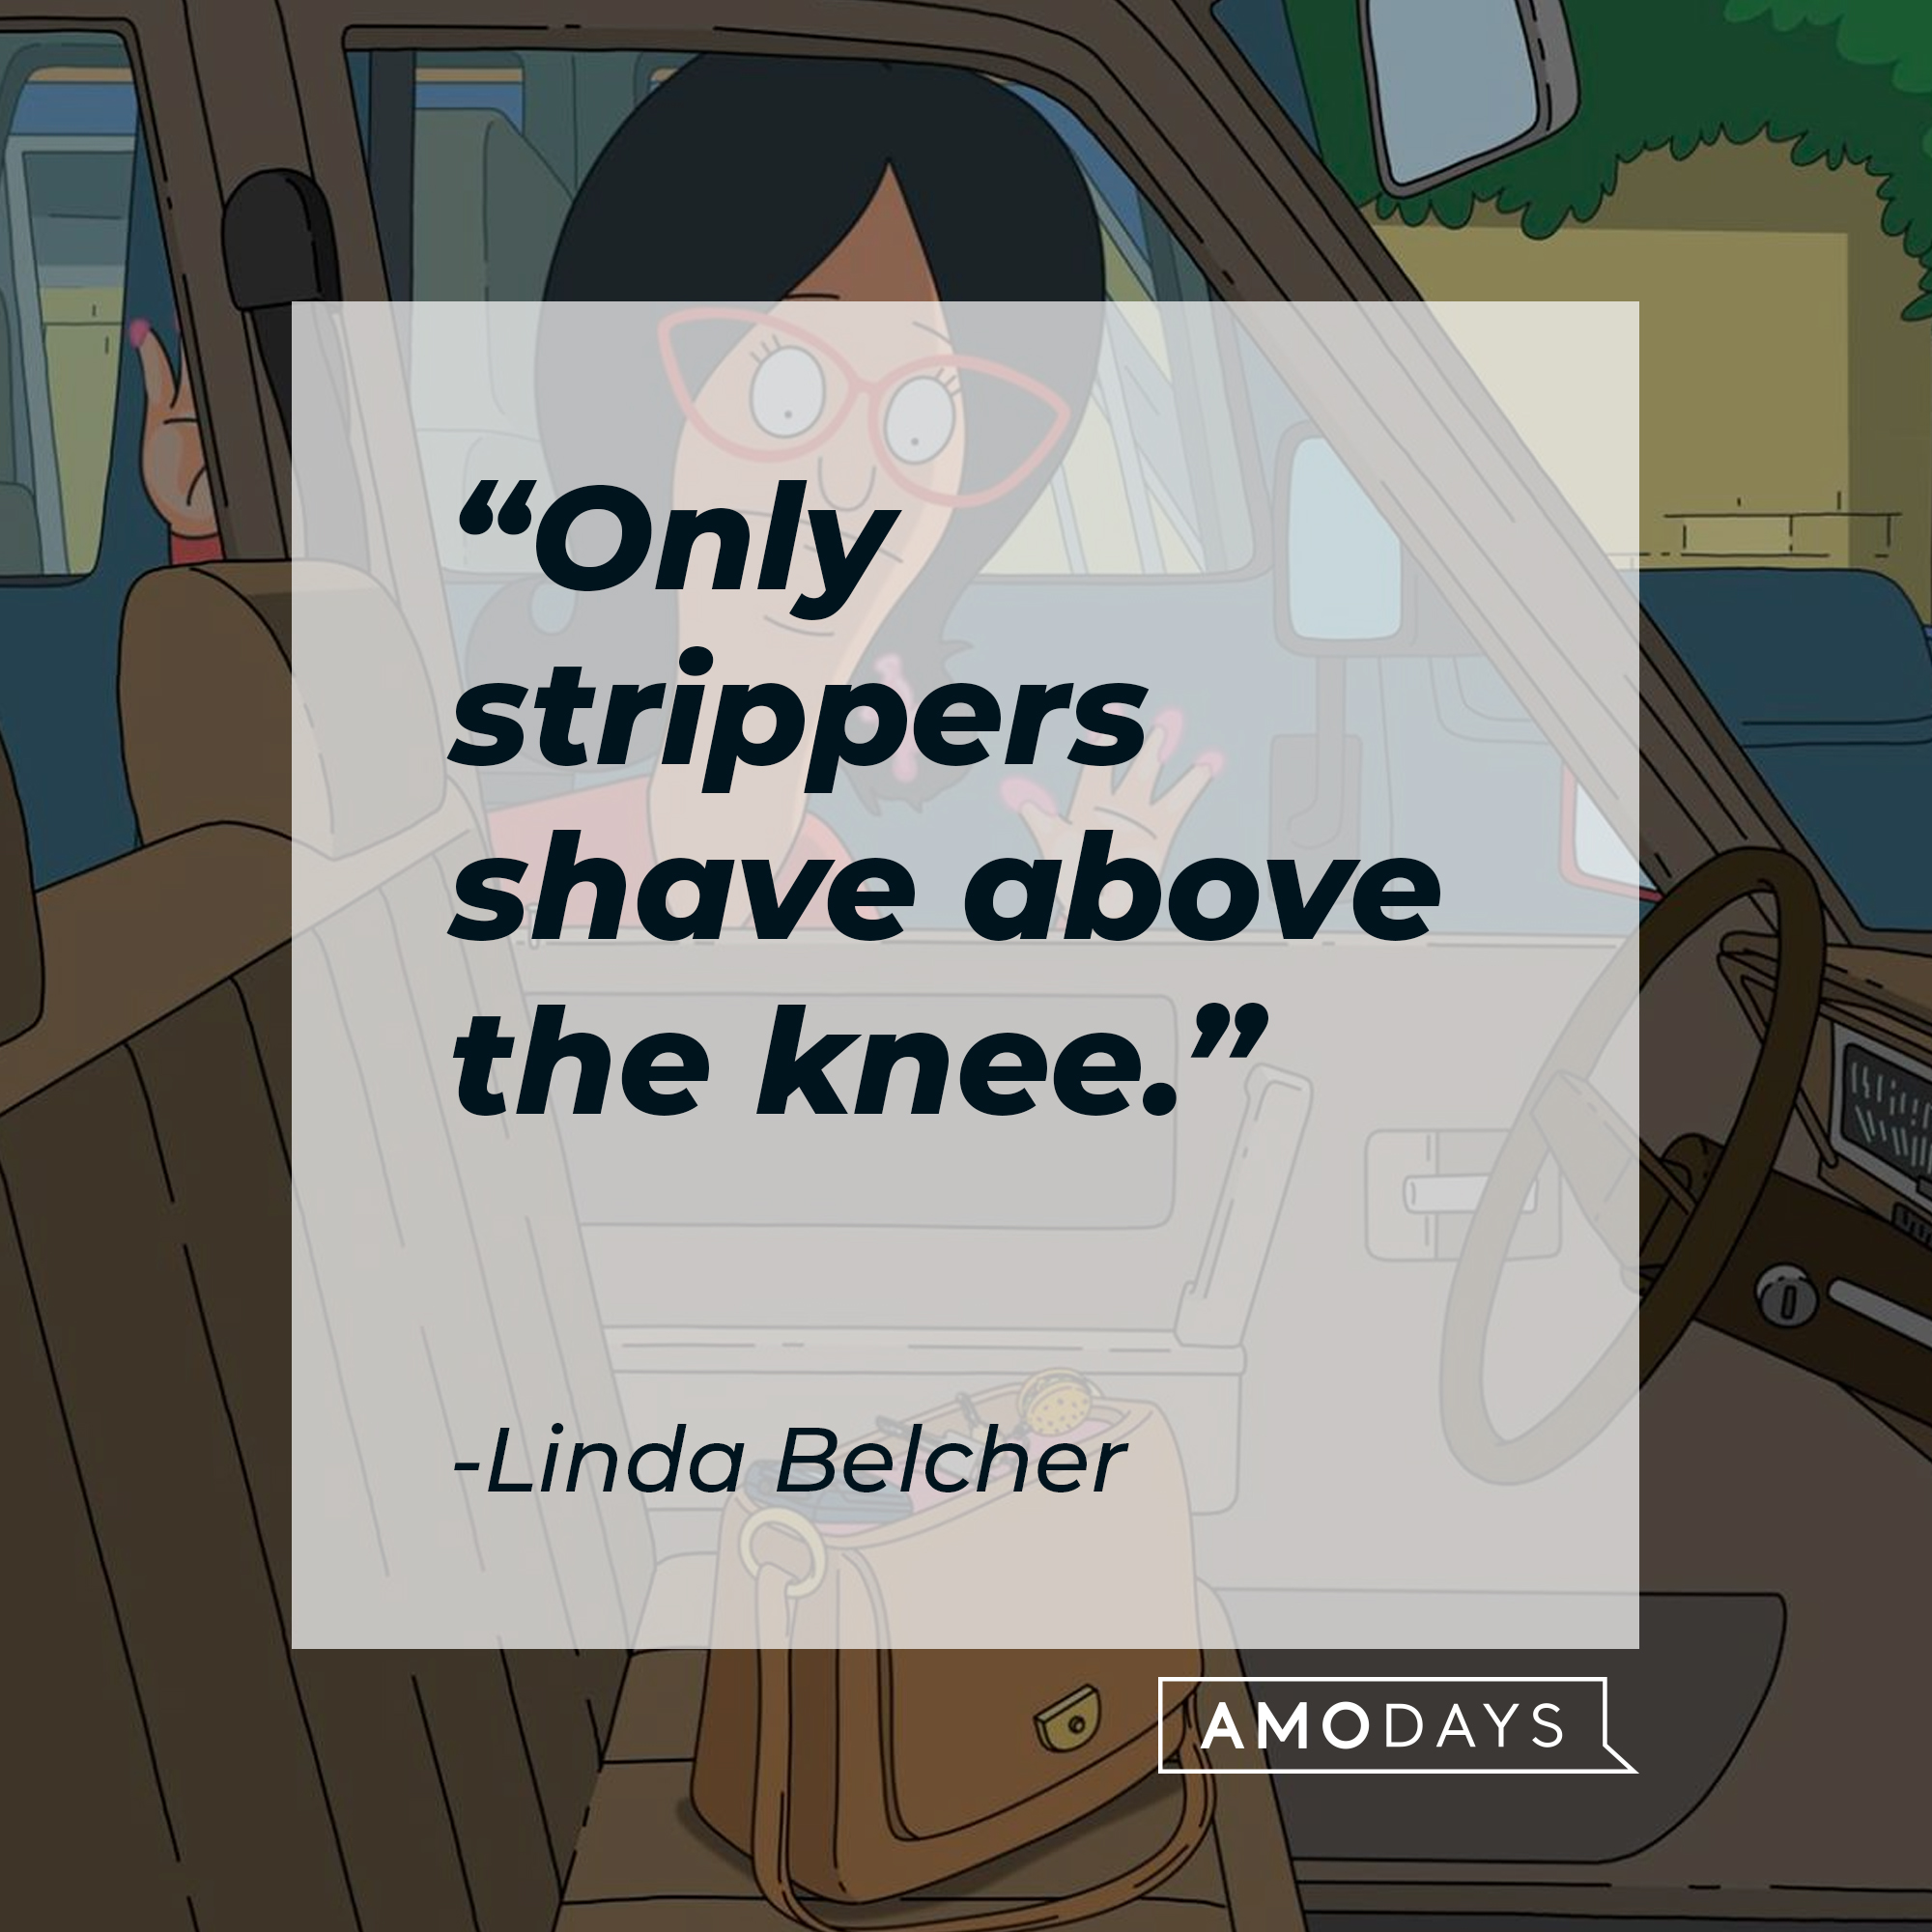 Linda Belcher with her quote: “Only strippers shave above the knee.” | Source: Facebook.com/BobsBurgers